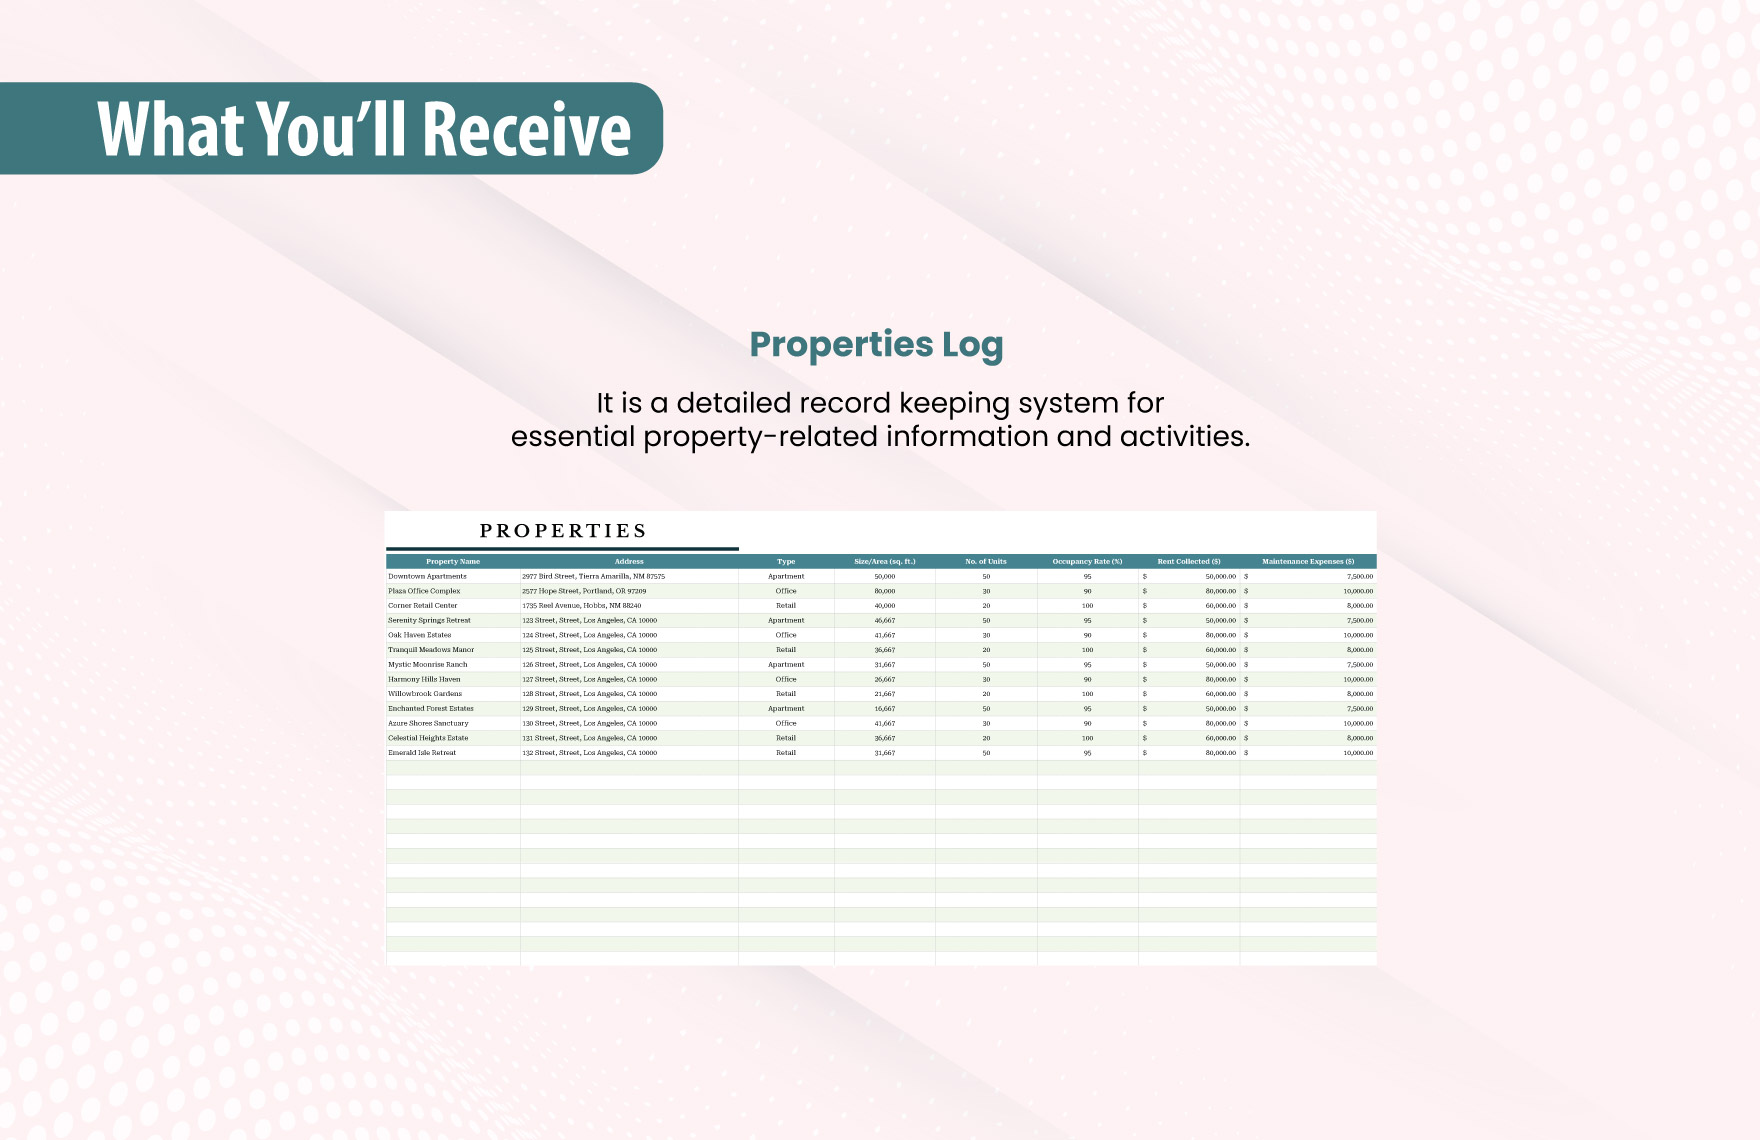 Sample Property Management Template